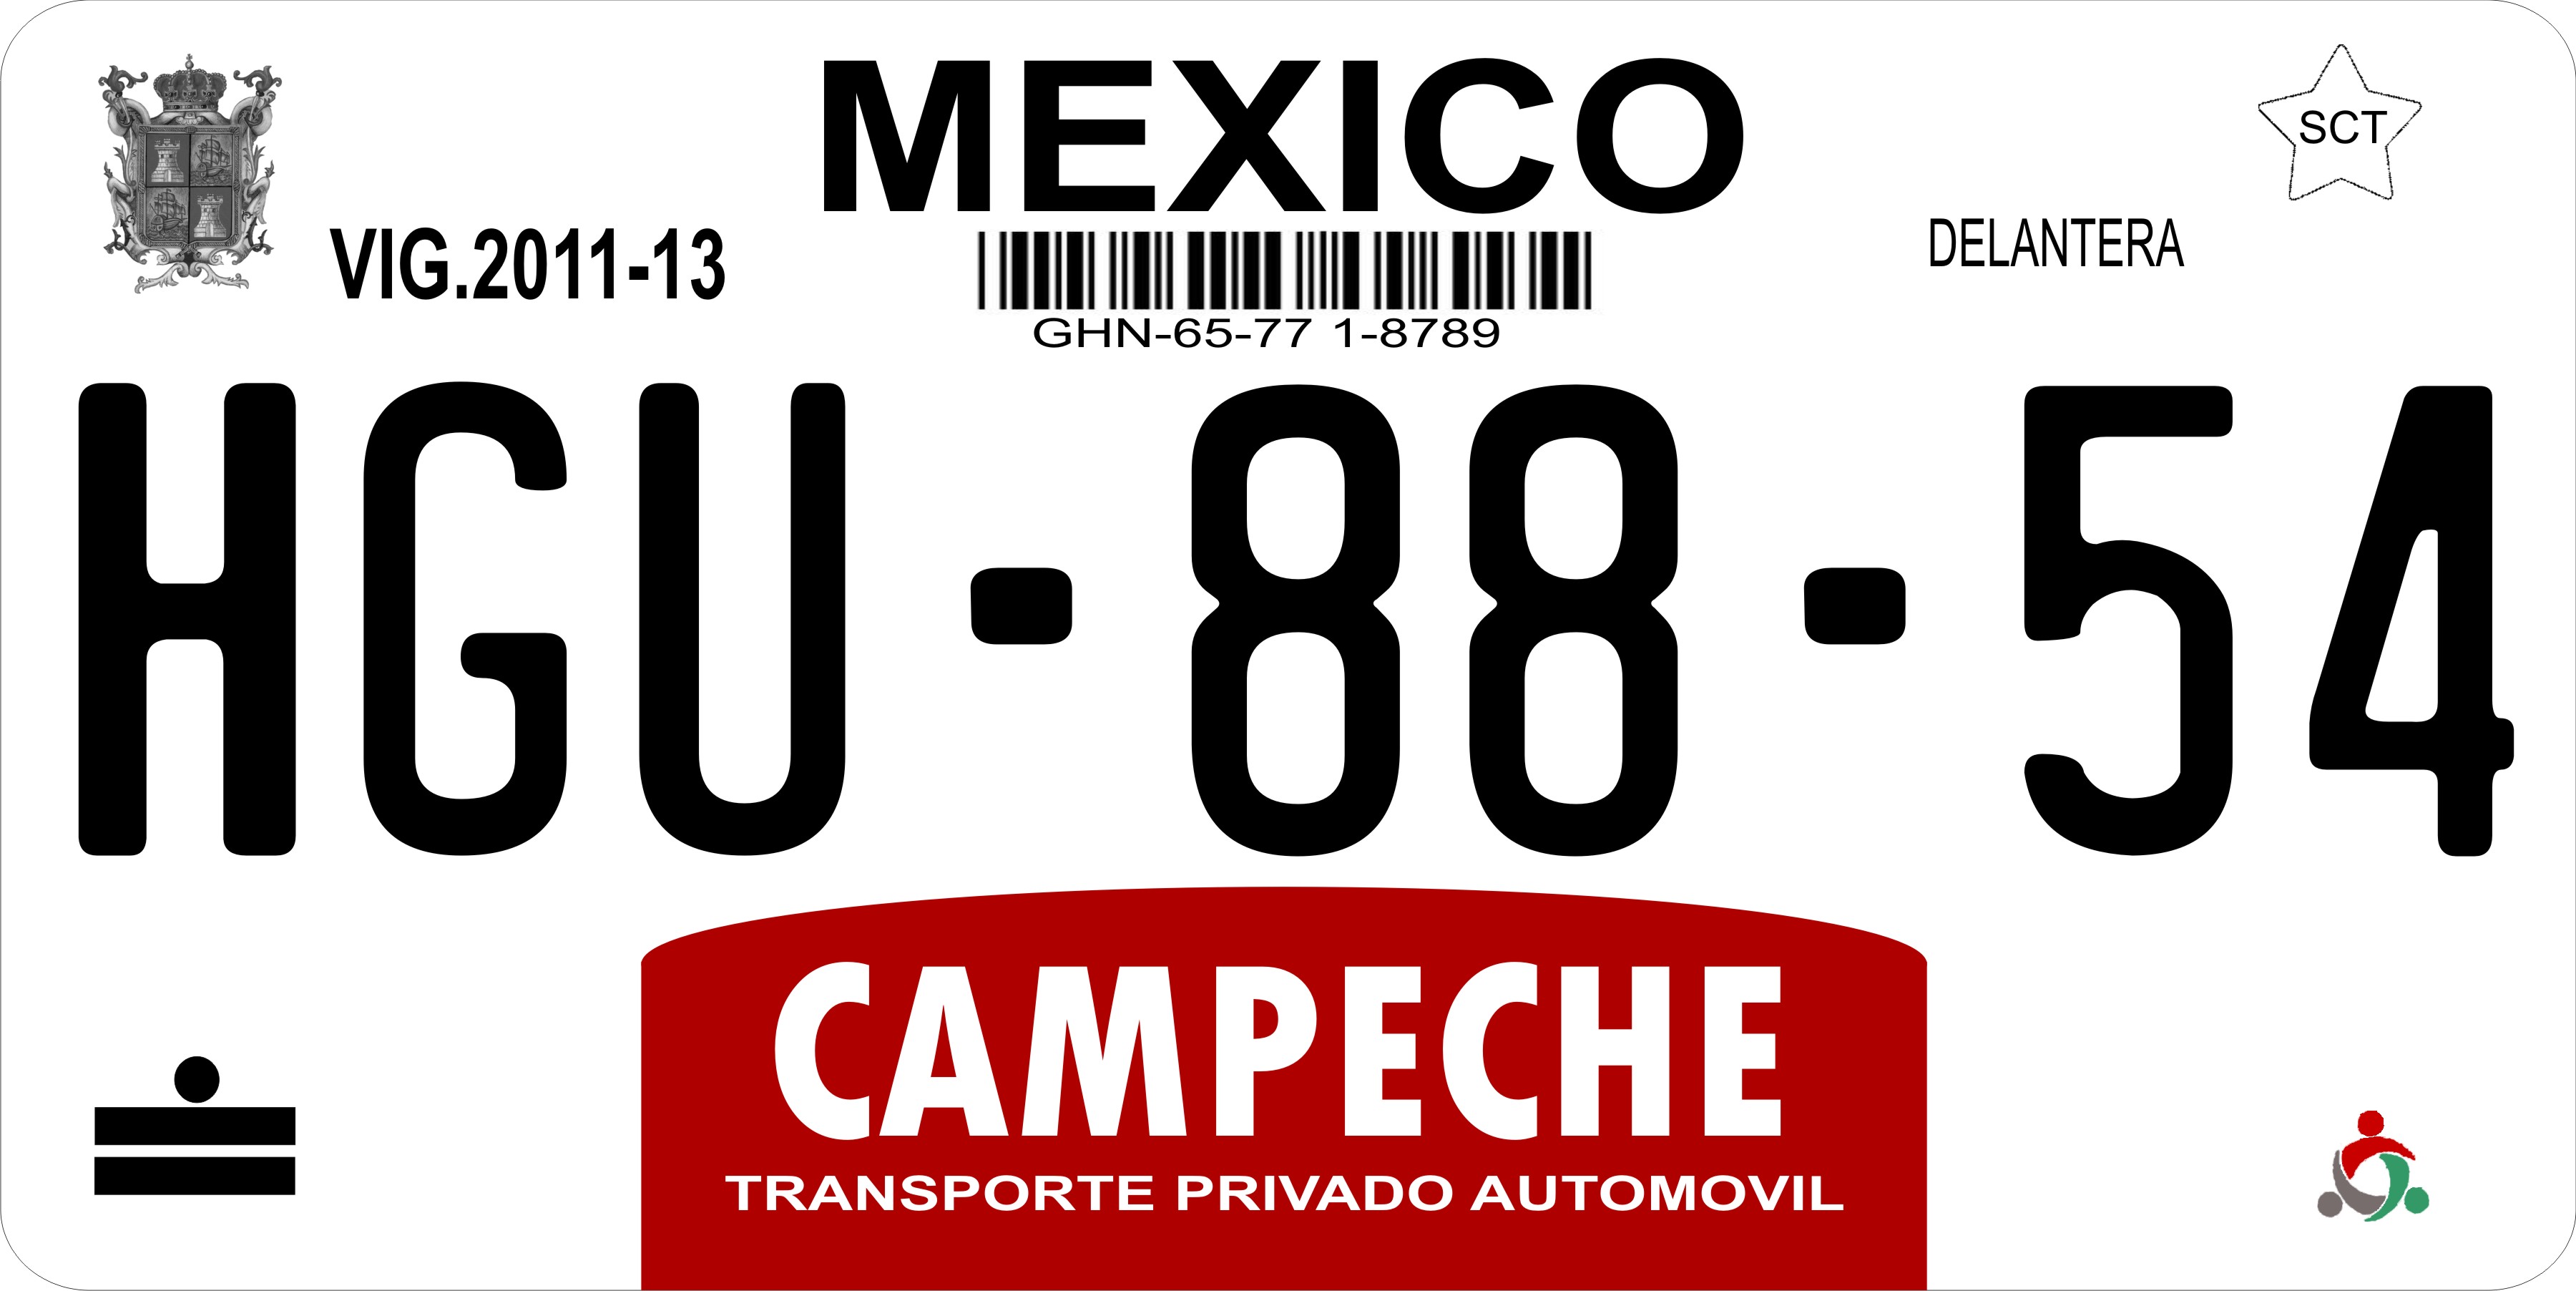 Mexico Campeche Photo LICENSE PLATE Free Personalization on this PLATE